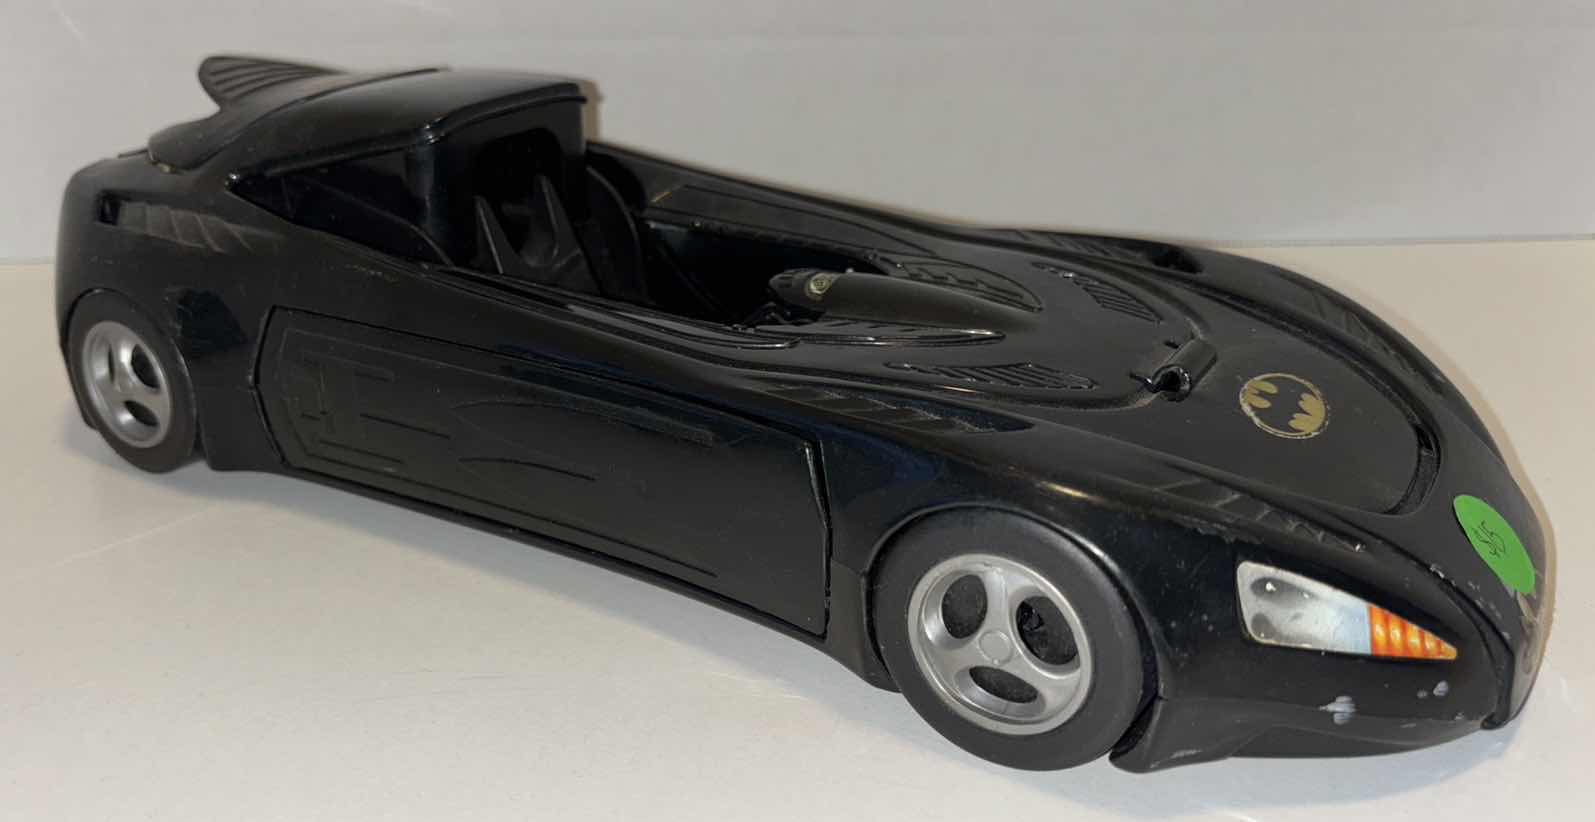 Photo 2 of ASSORTED VERSIONS OF BATMOBILE VEHICLES (3)